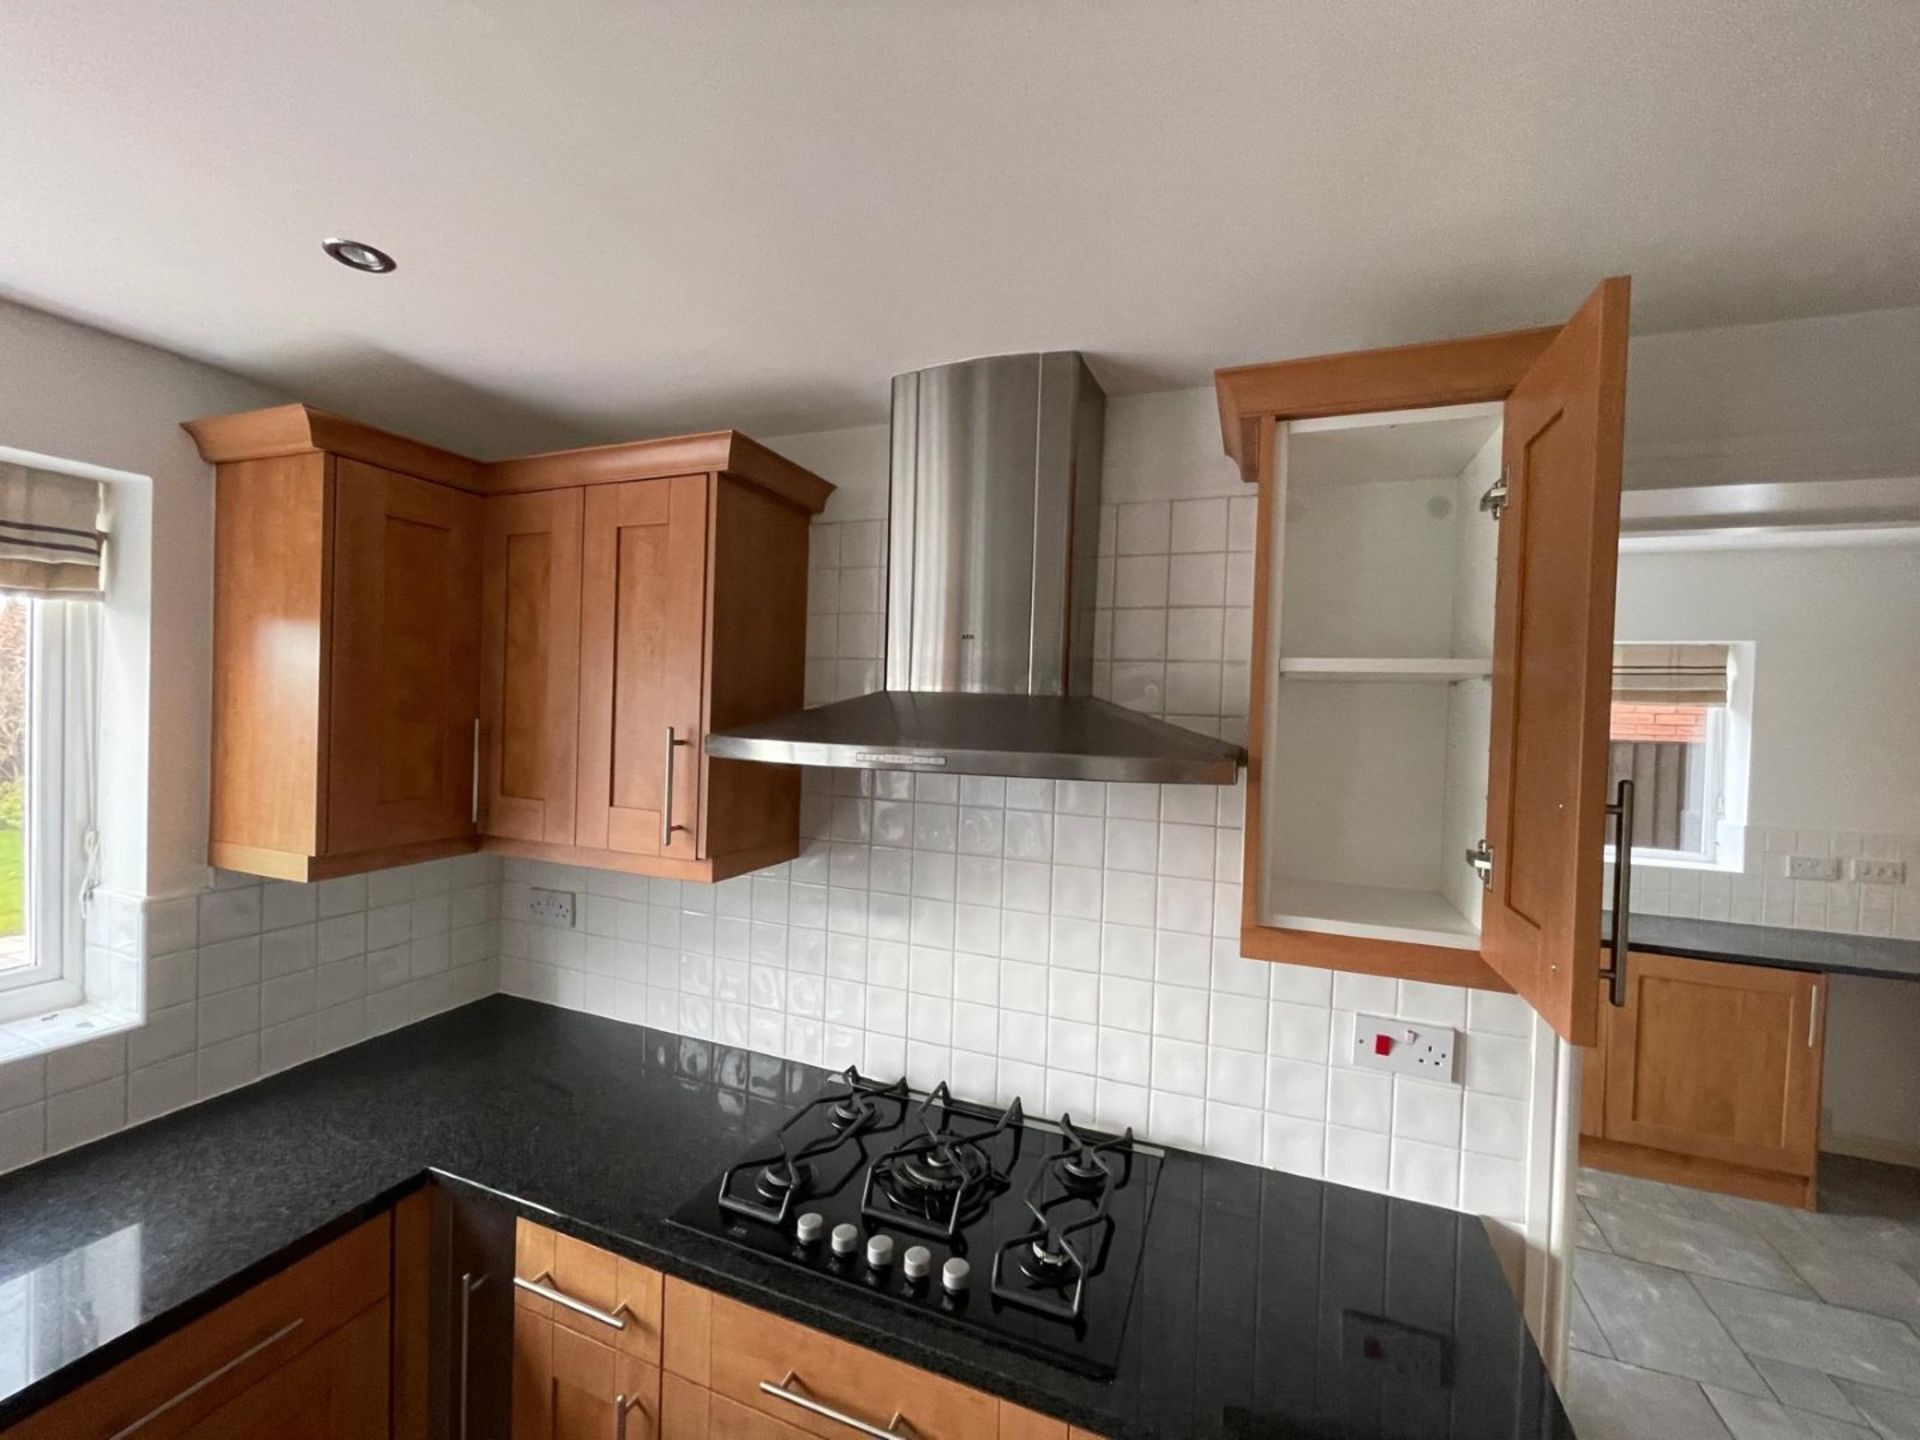 1 x Shaker-style, Feature-rich Fitted Kitchen with Solid Wood Doors, Granite Worktops and Appliances - Image 63 of 111